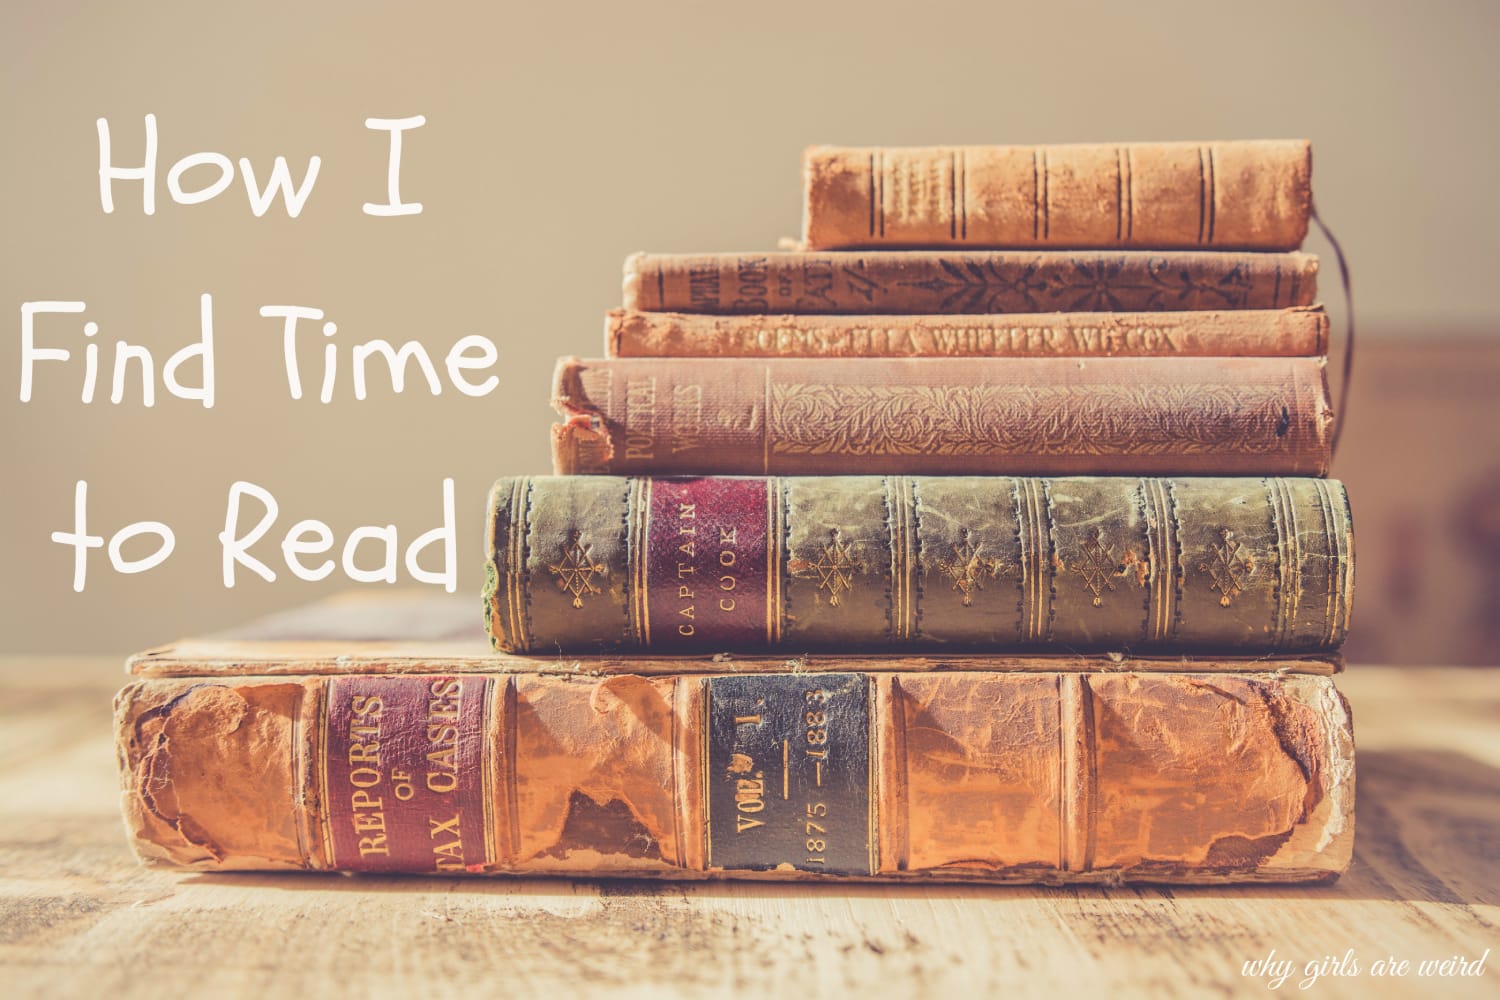 How I Find Time to Read